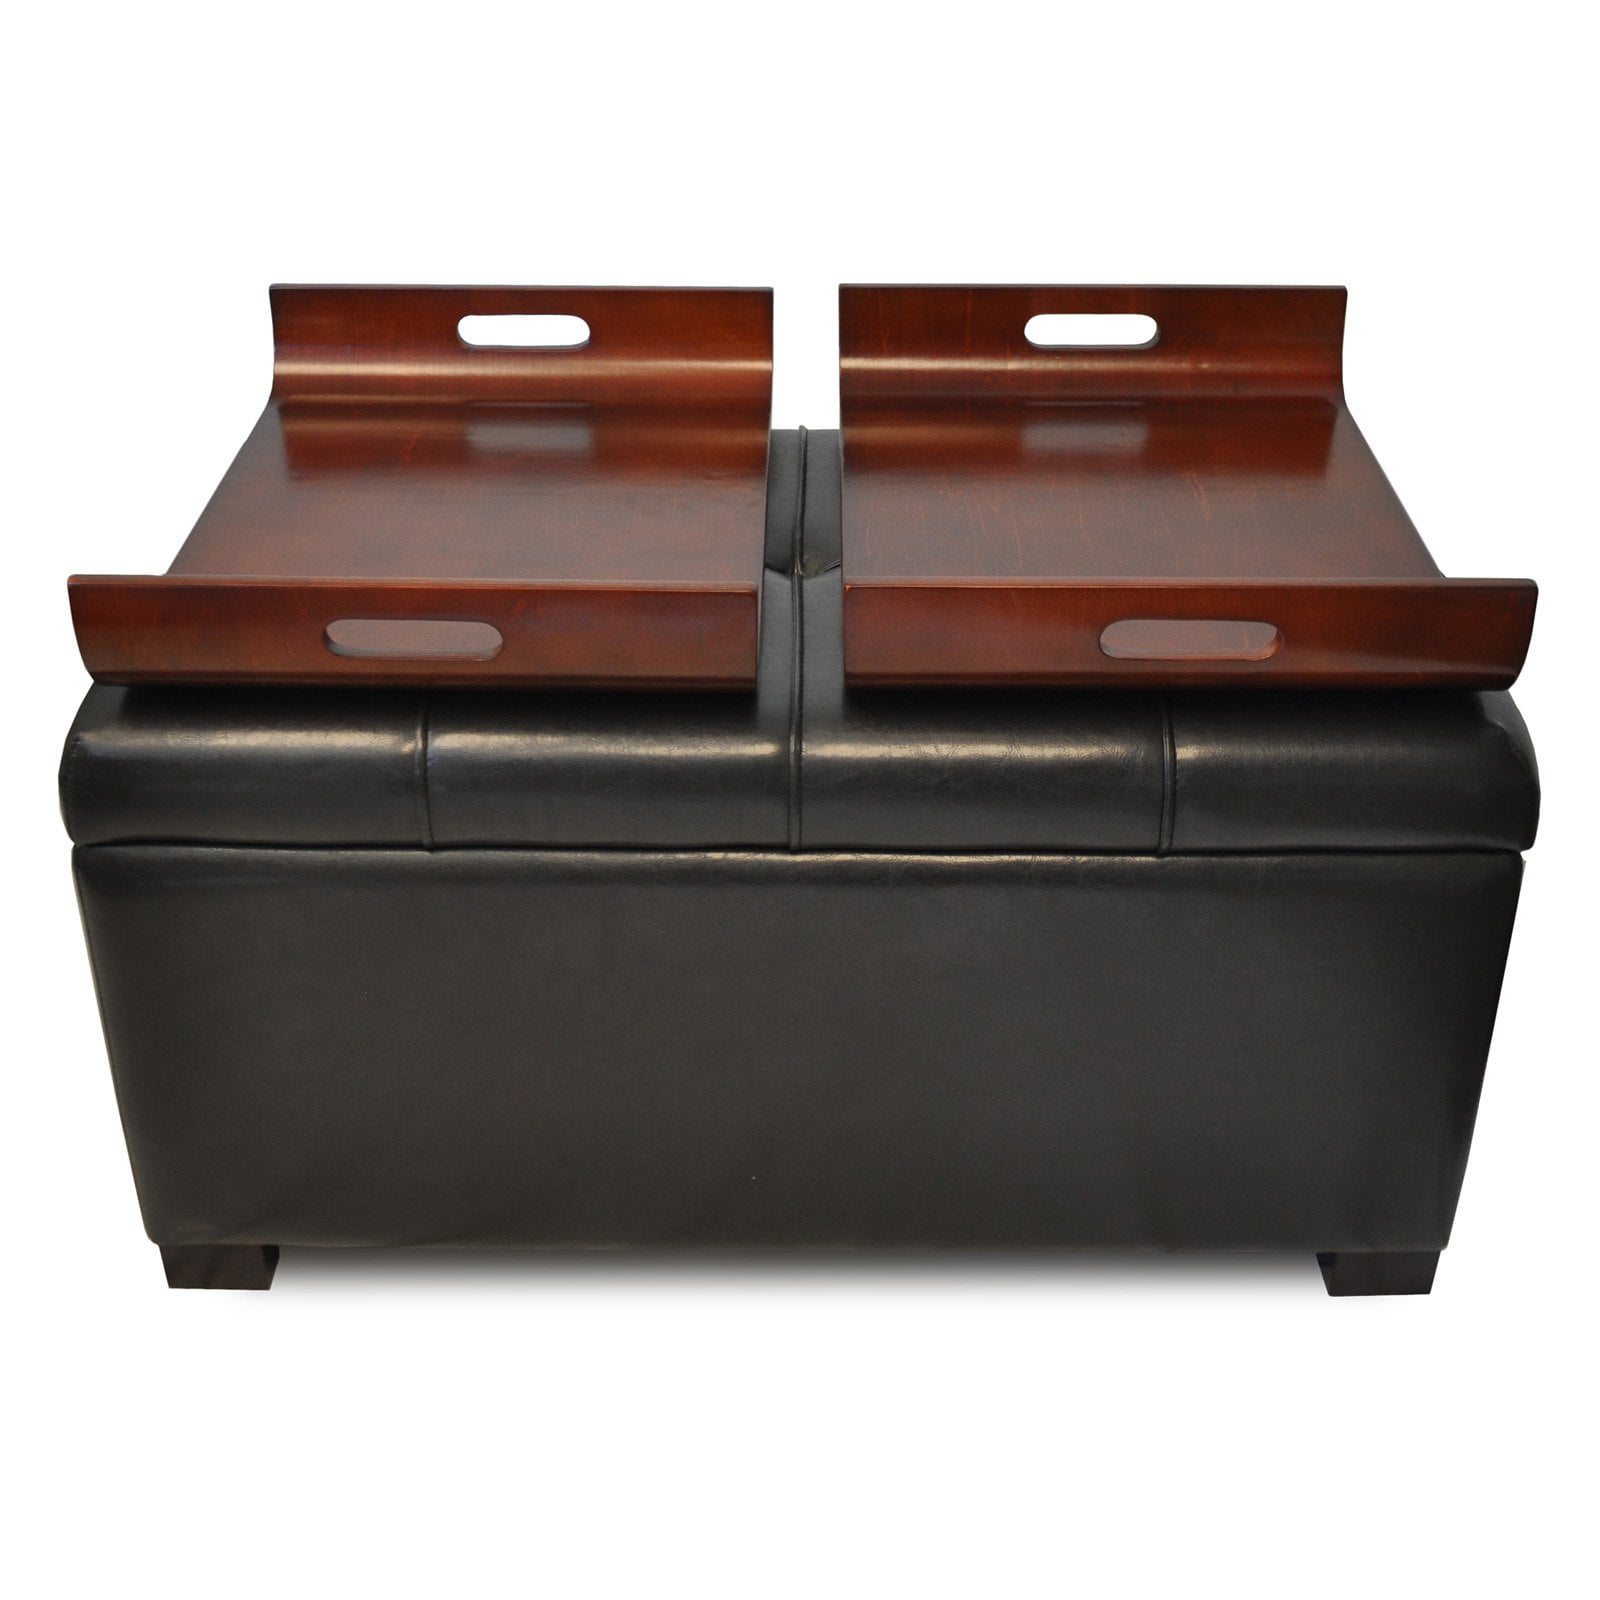 Design4comfort Faux Leather Storage, Brown Leather Cube Storage Ottoman With Tray